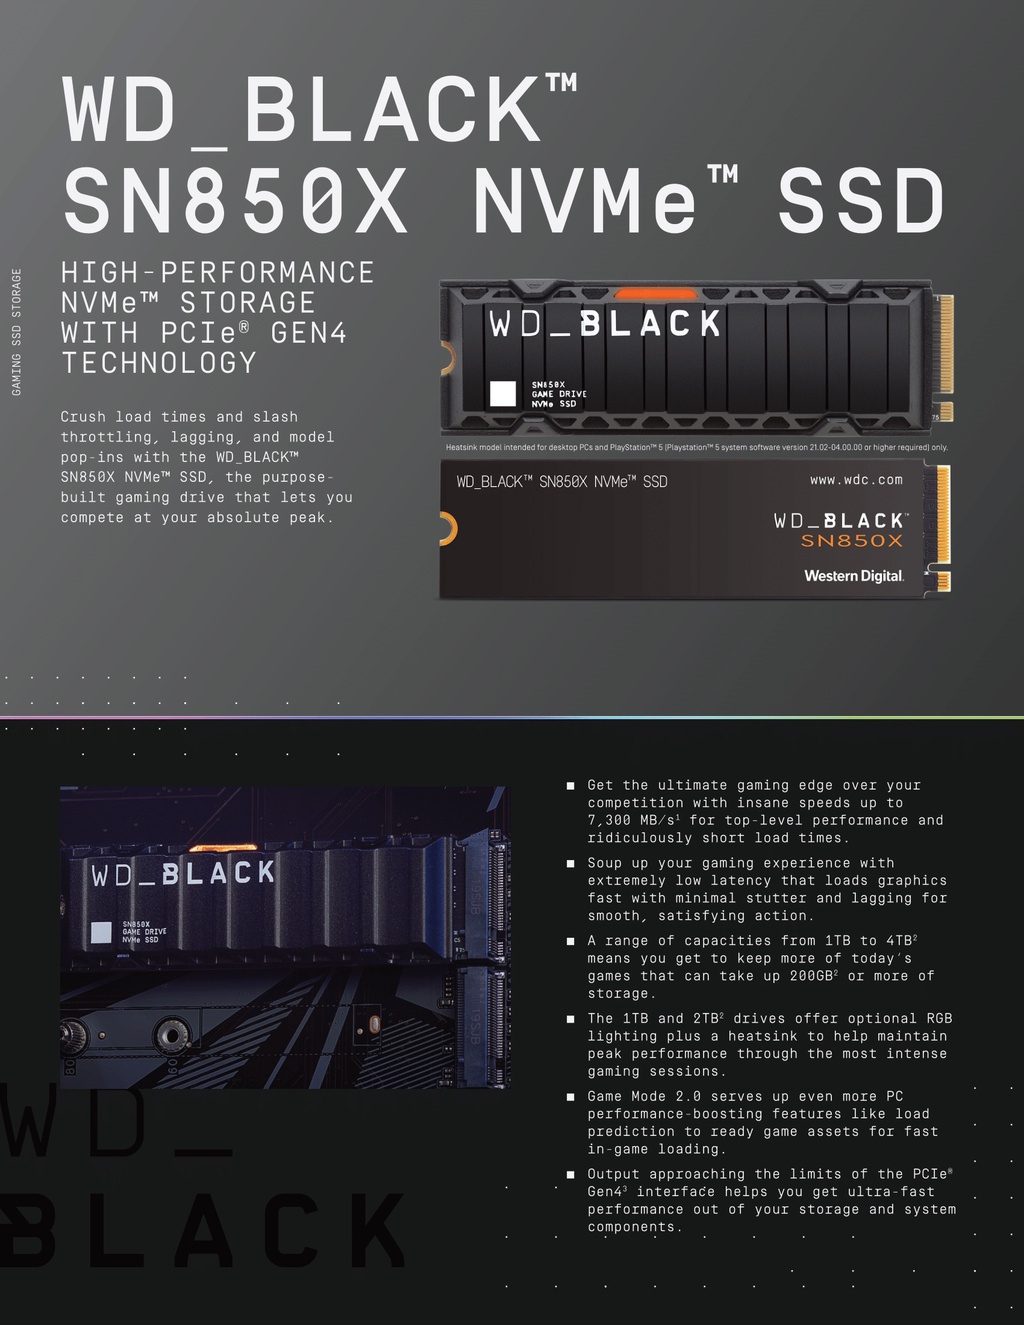 WD_BLACK SN850X NVMe SSD WDS100T2XHE - SSD - 1 TB - PCIe 4.0 x4 (NVMe) -  WDS100T2XHE - Solid State Drives 